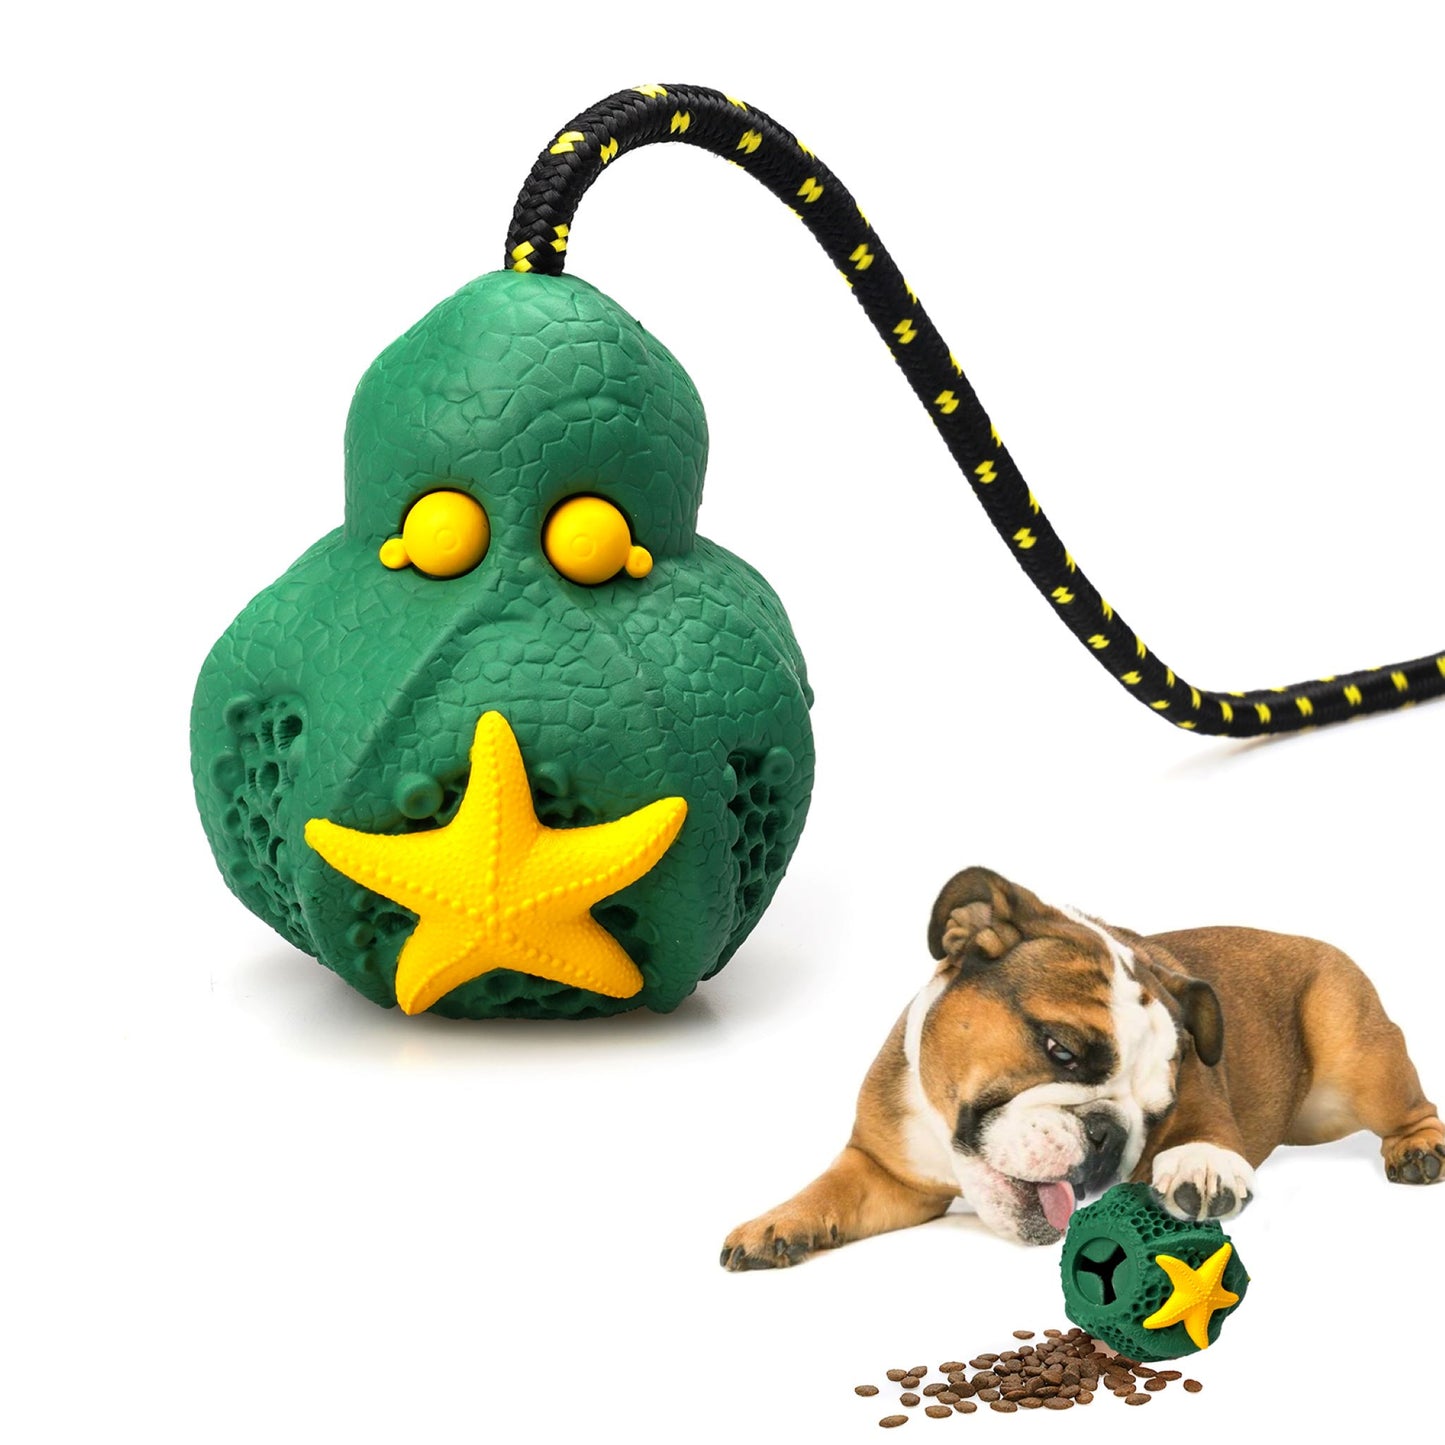 ROYAL PETS USA Indestructible, Durable & Tough Octopus Dog Chew Toy for Aggressive Chewers. Slow Treat Dispensing Interactive Toys for S, M & L Breed -100% NATURAL RUBBER -10000 BITES TESTED - UNIQUE DESIGN FOR ORAL CARE